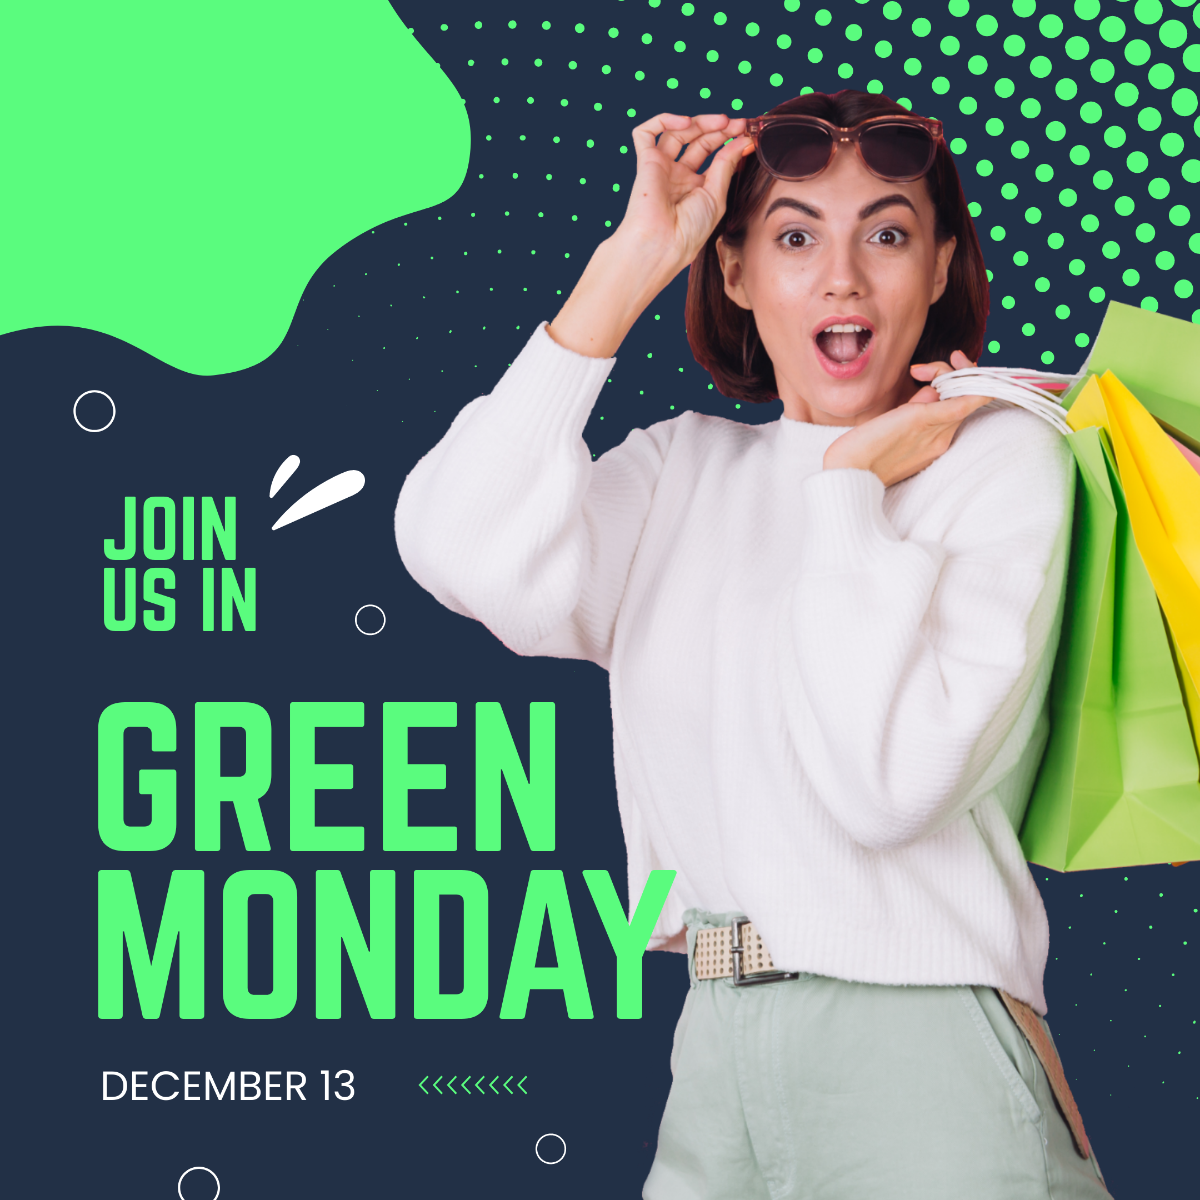 Green Monday Promotion Instagram Post Template